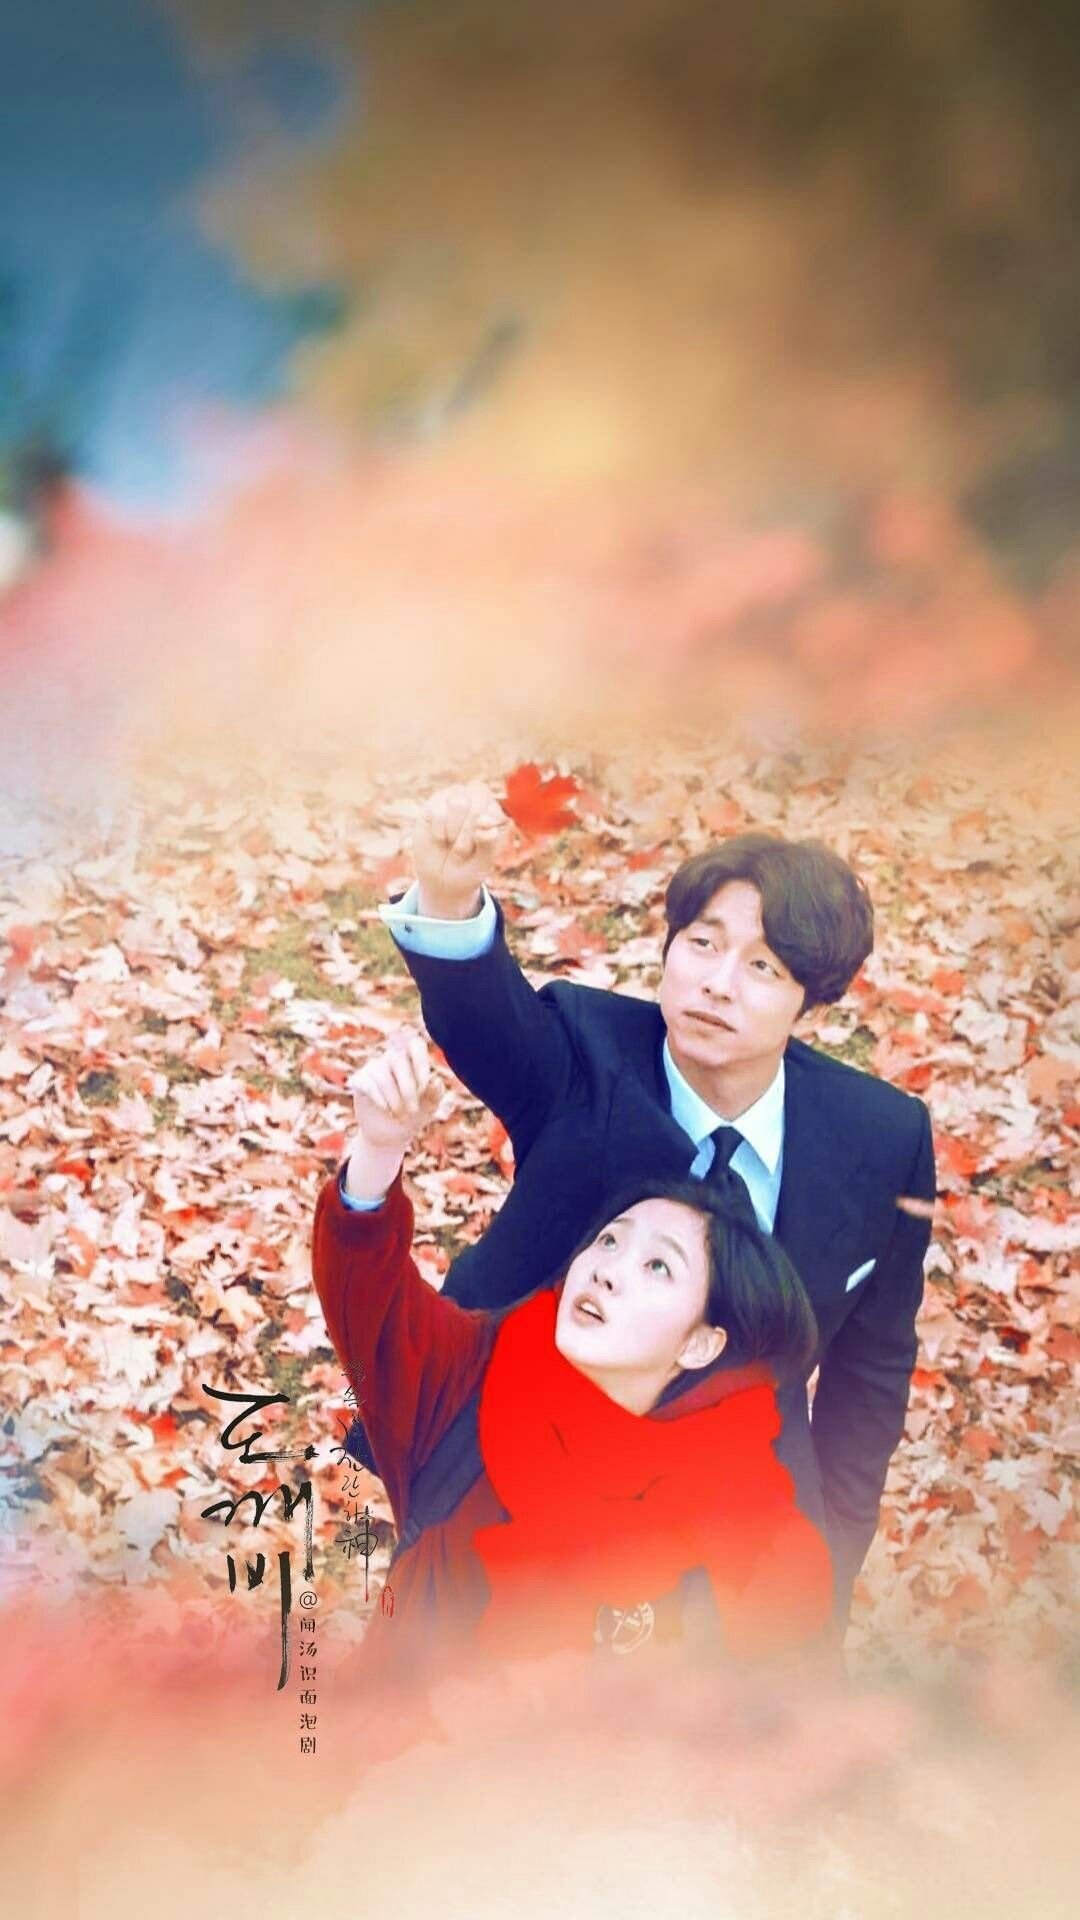 Kdrama aesthetic Wallpapers Download MobCup